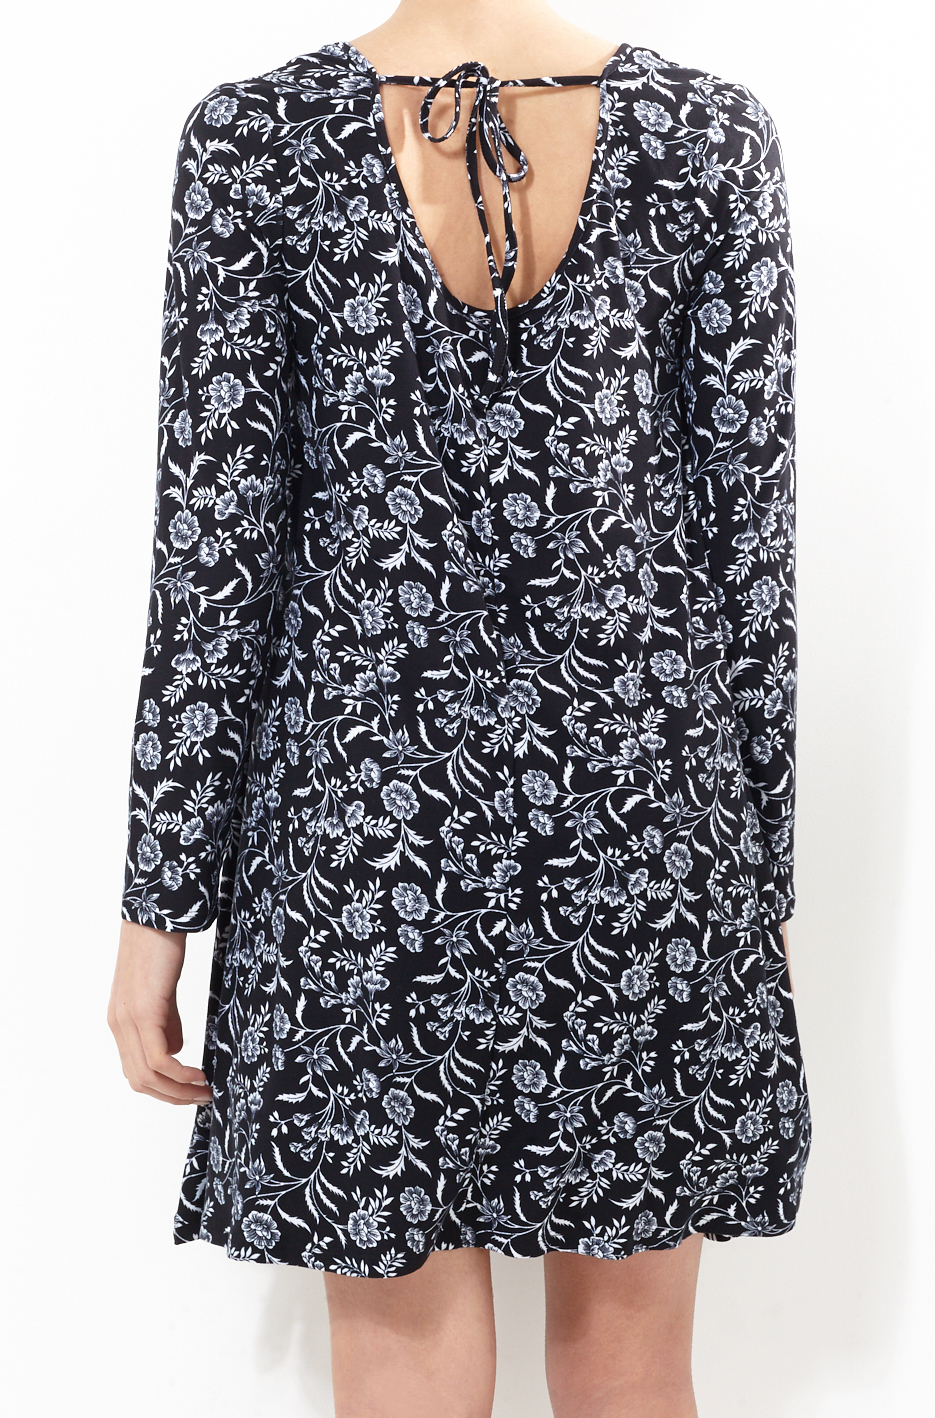 Brave Soul London Dark Paisley Print Low Tie Back Dress S RRP £29.99 CLEARANCE XL £2.99 or 2 for £5